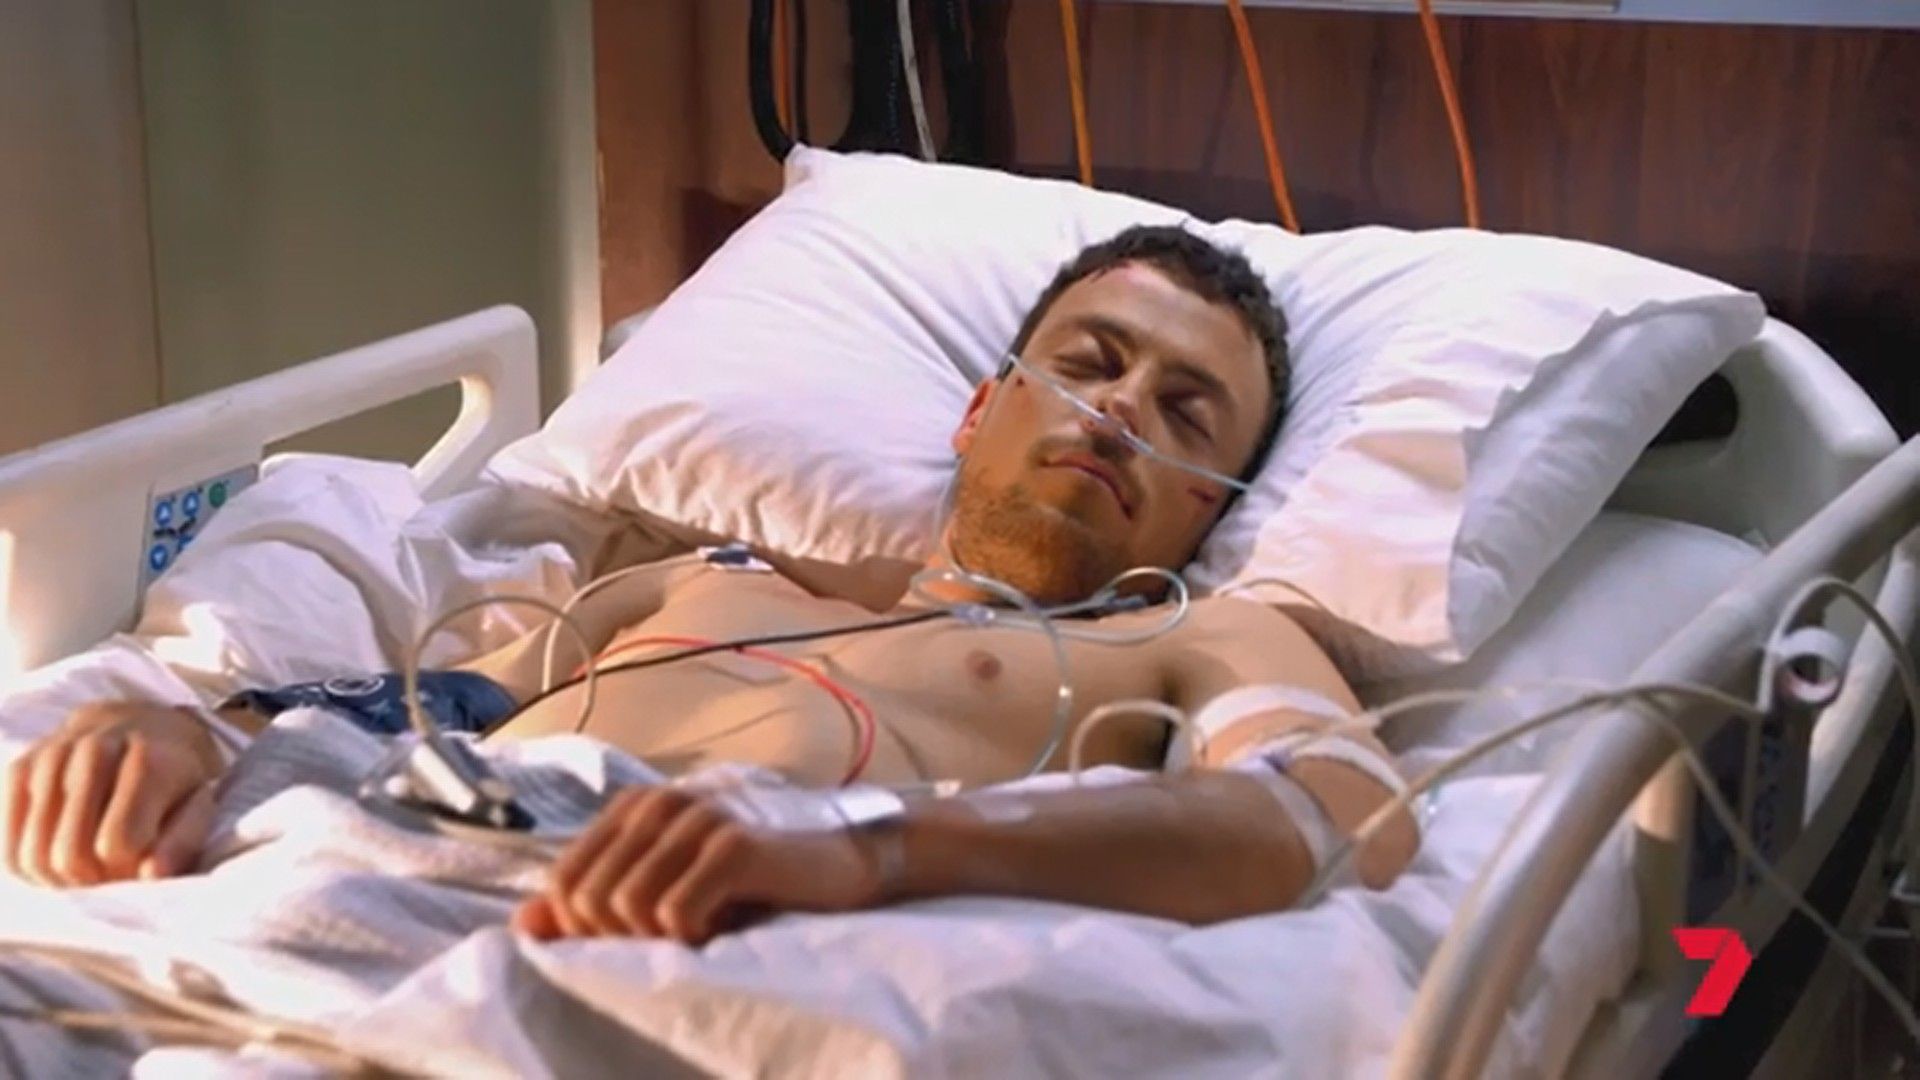 Does Eden die in Home and Away? Aftermath of horror car crash, Soaps